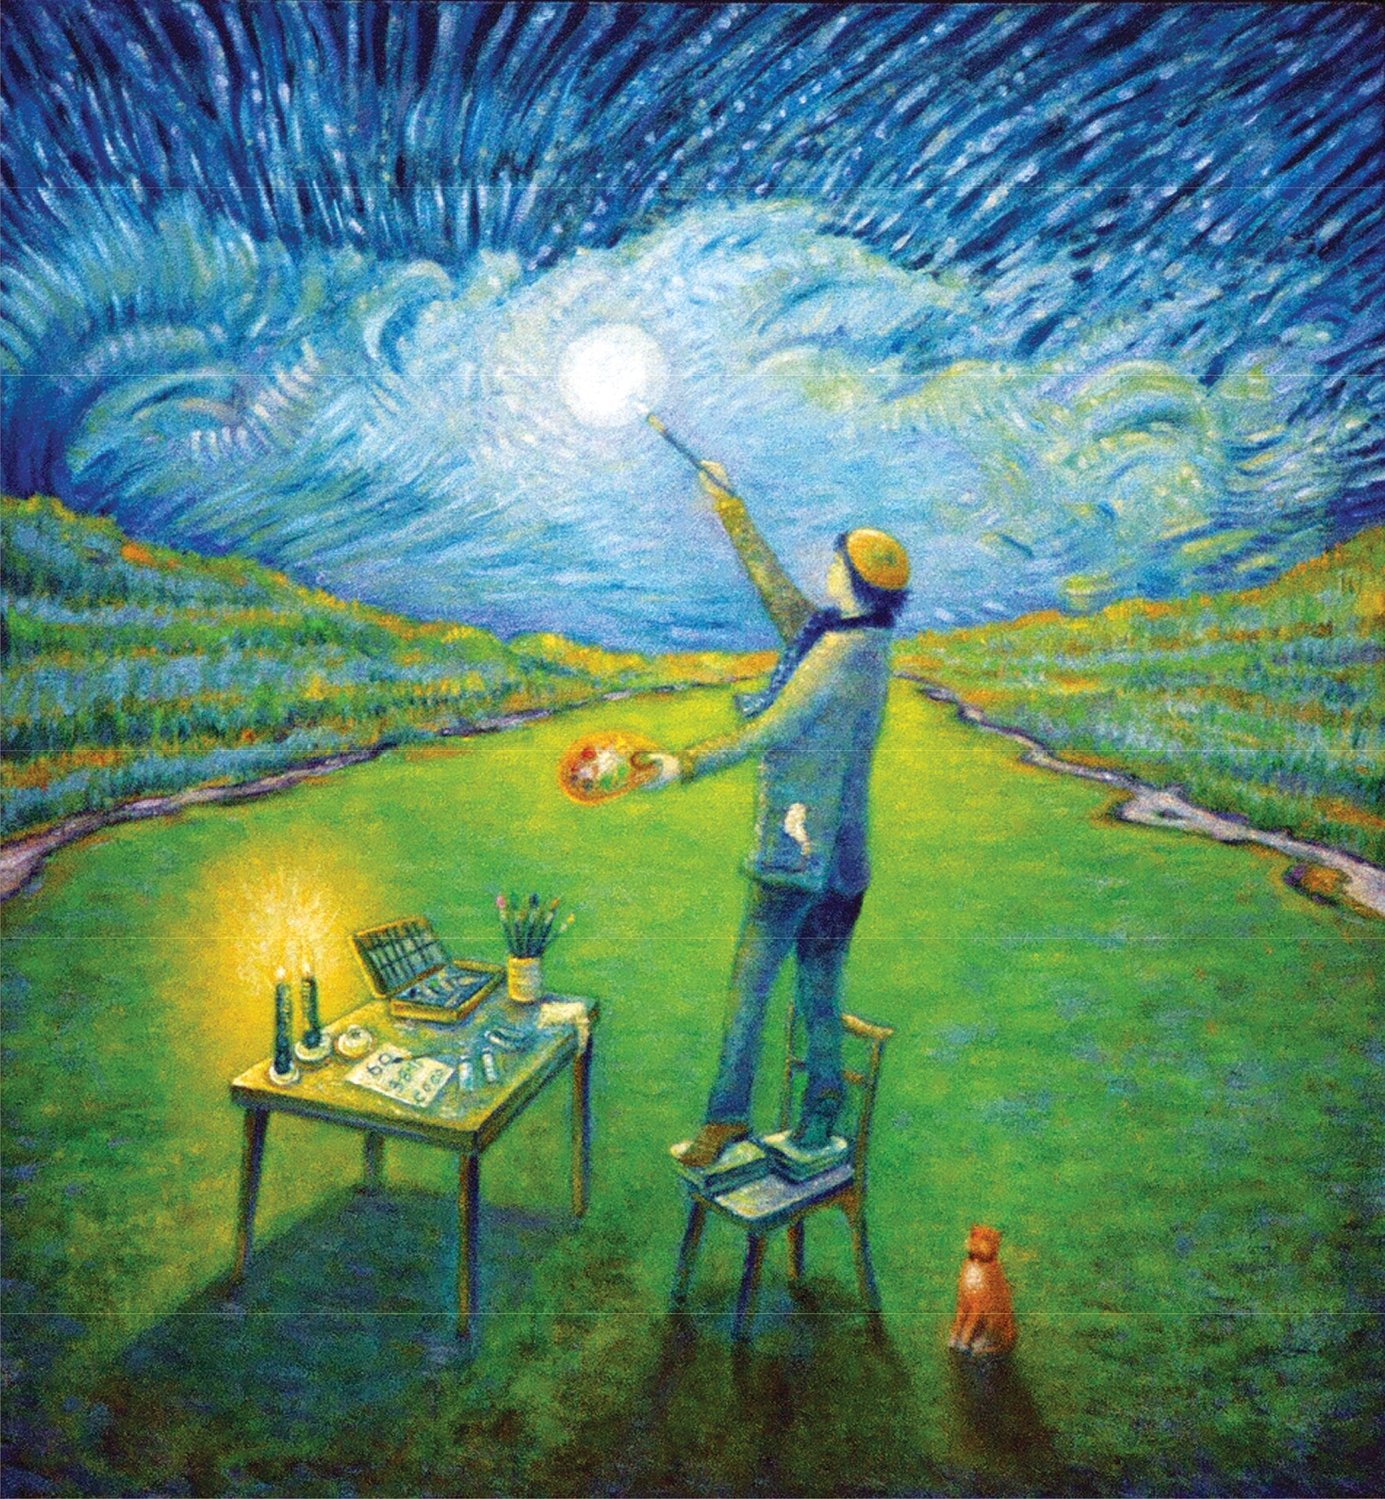 The cover image of “I Paint the Moon,” a coffee-table art book featuring paintings by Bucks County artist and musician Joe Coco.